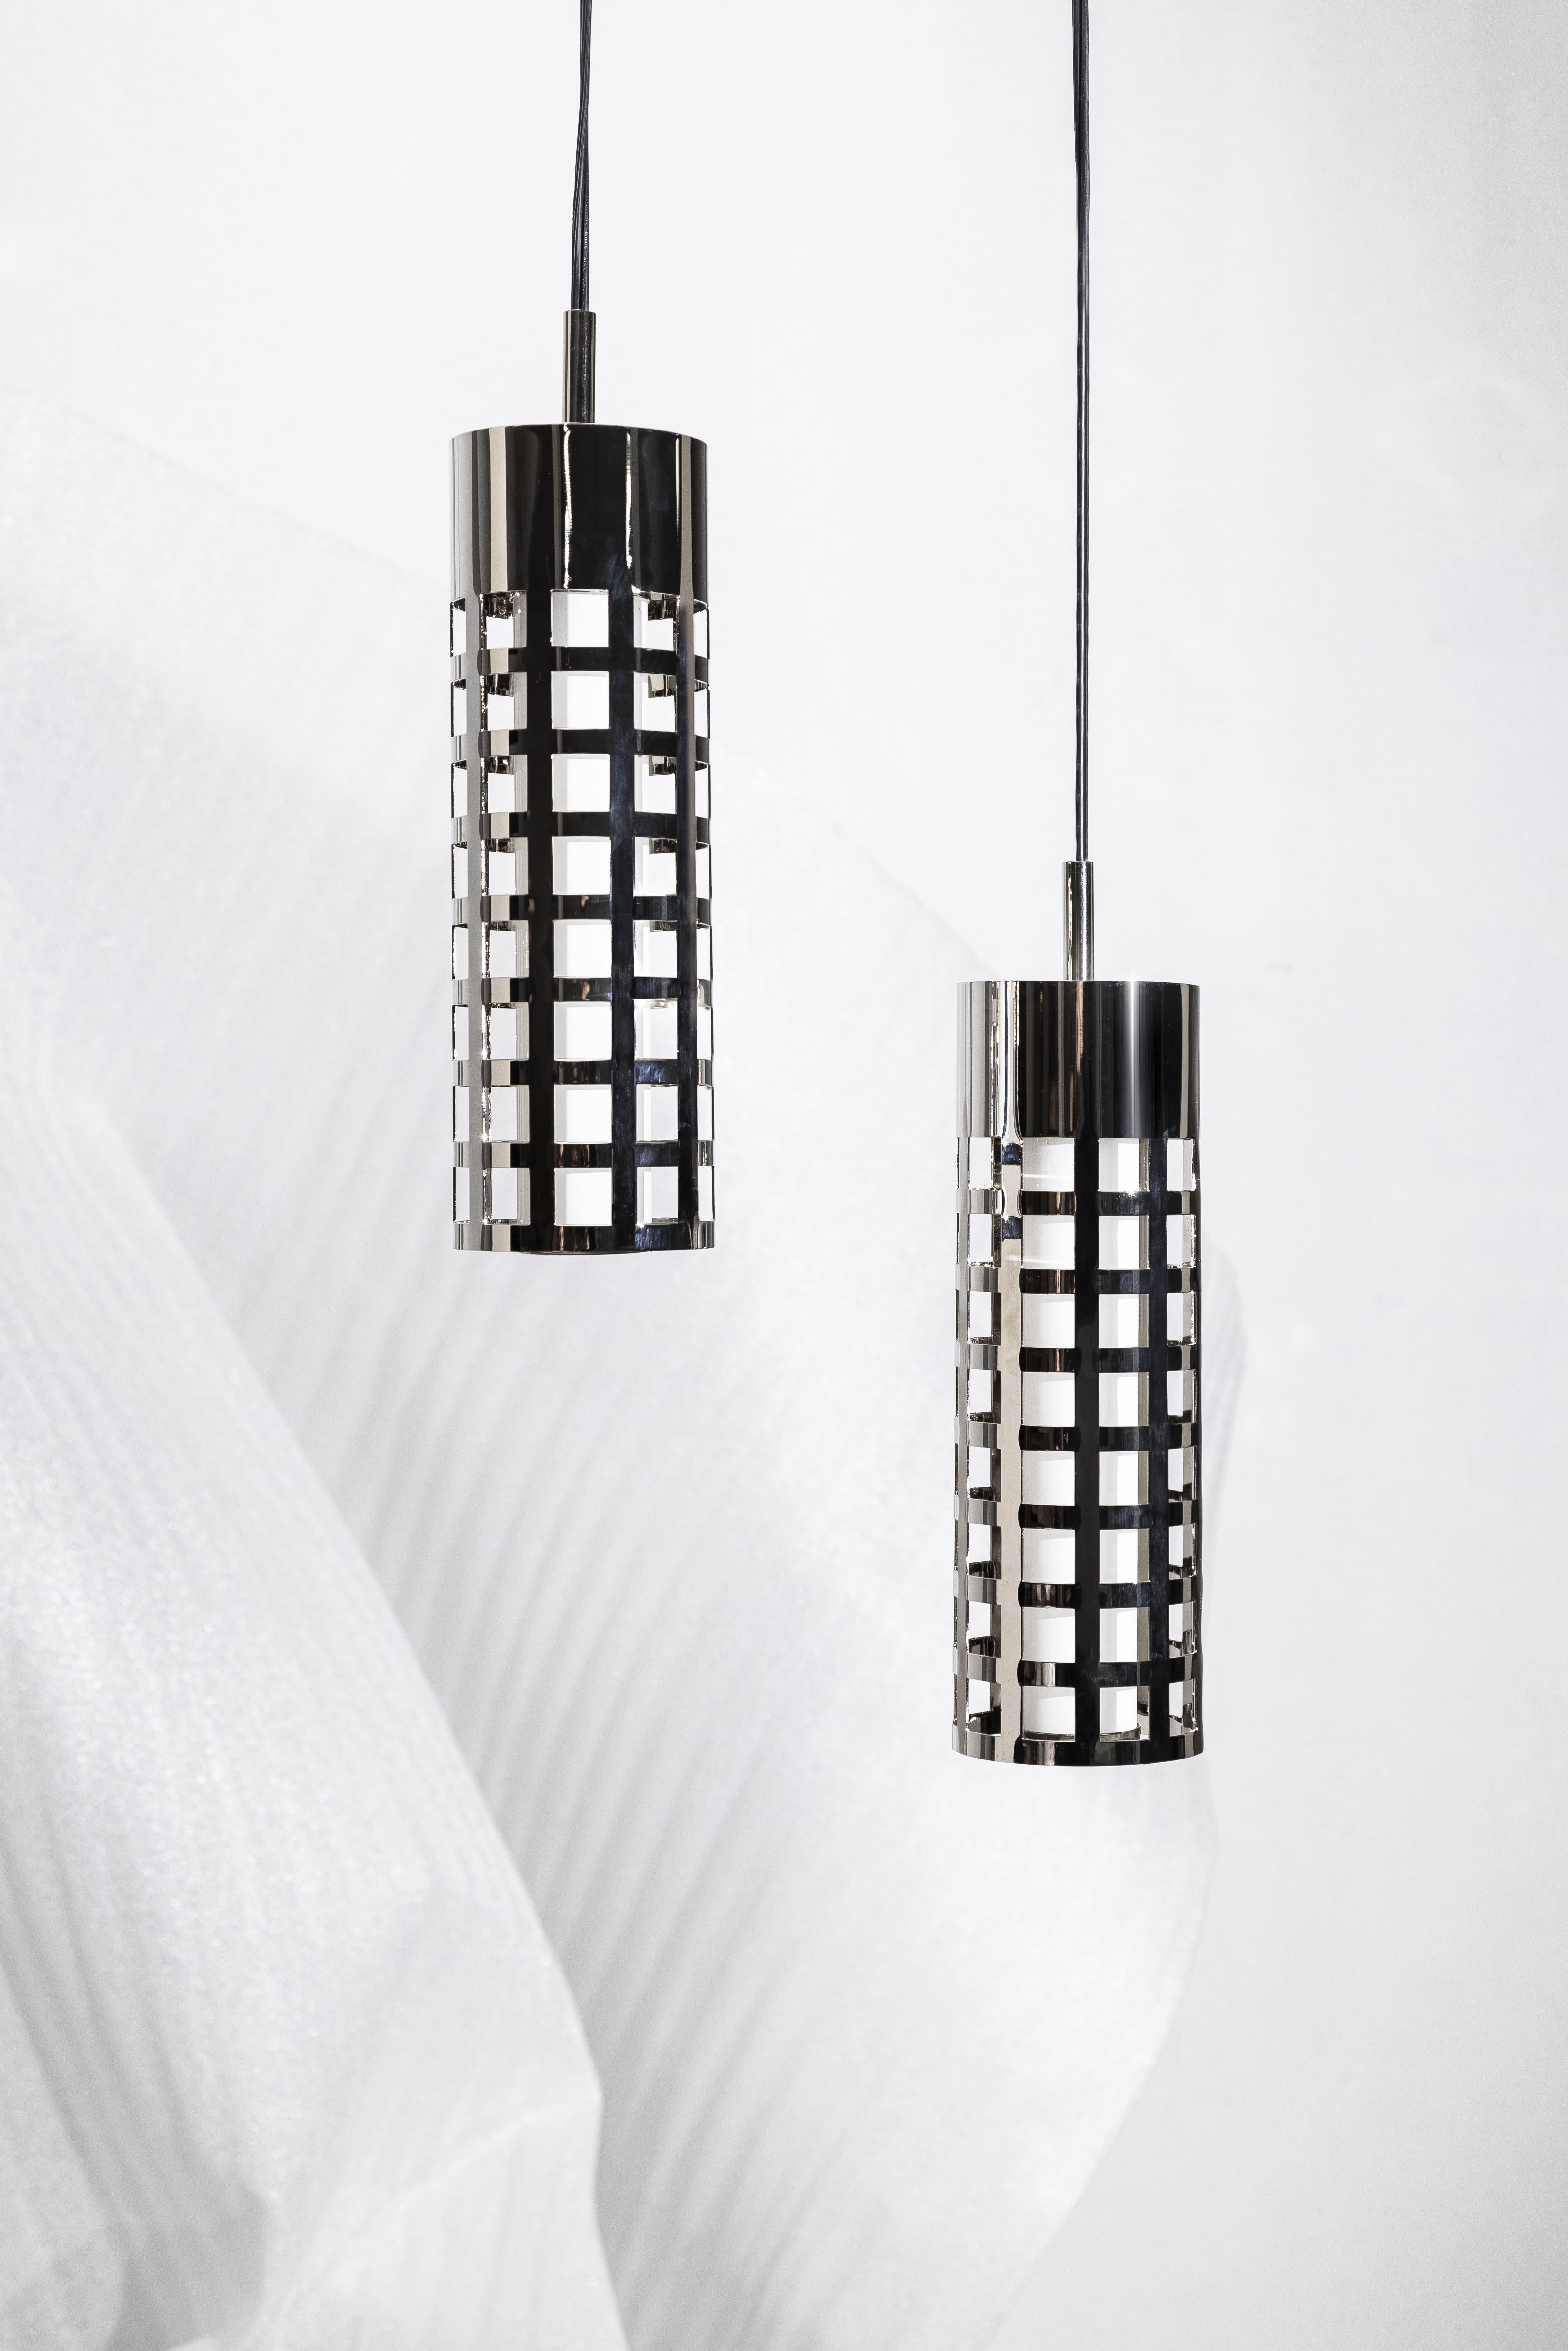 STANDING STEEL, an objet d’art. Meticulously crafted from polished nickel, this pendant is a symphony of shapes, capturing the essence of industrial chic. Each element has been carefully considered and crafted, resulting in a complex and captivating